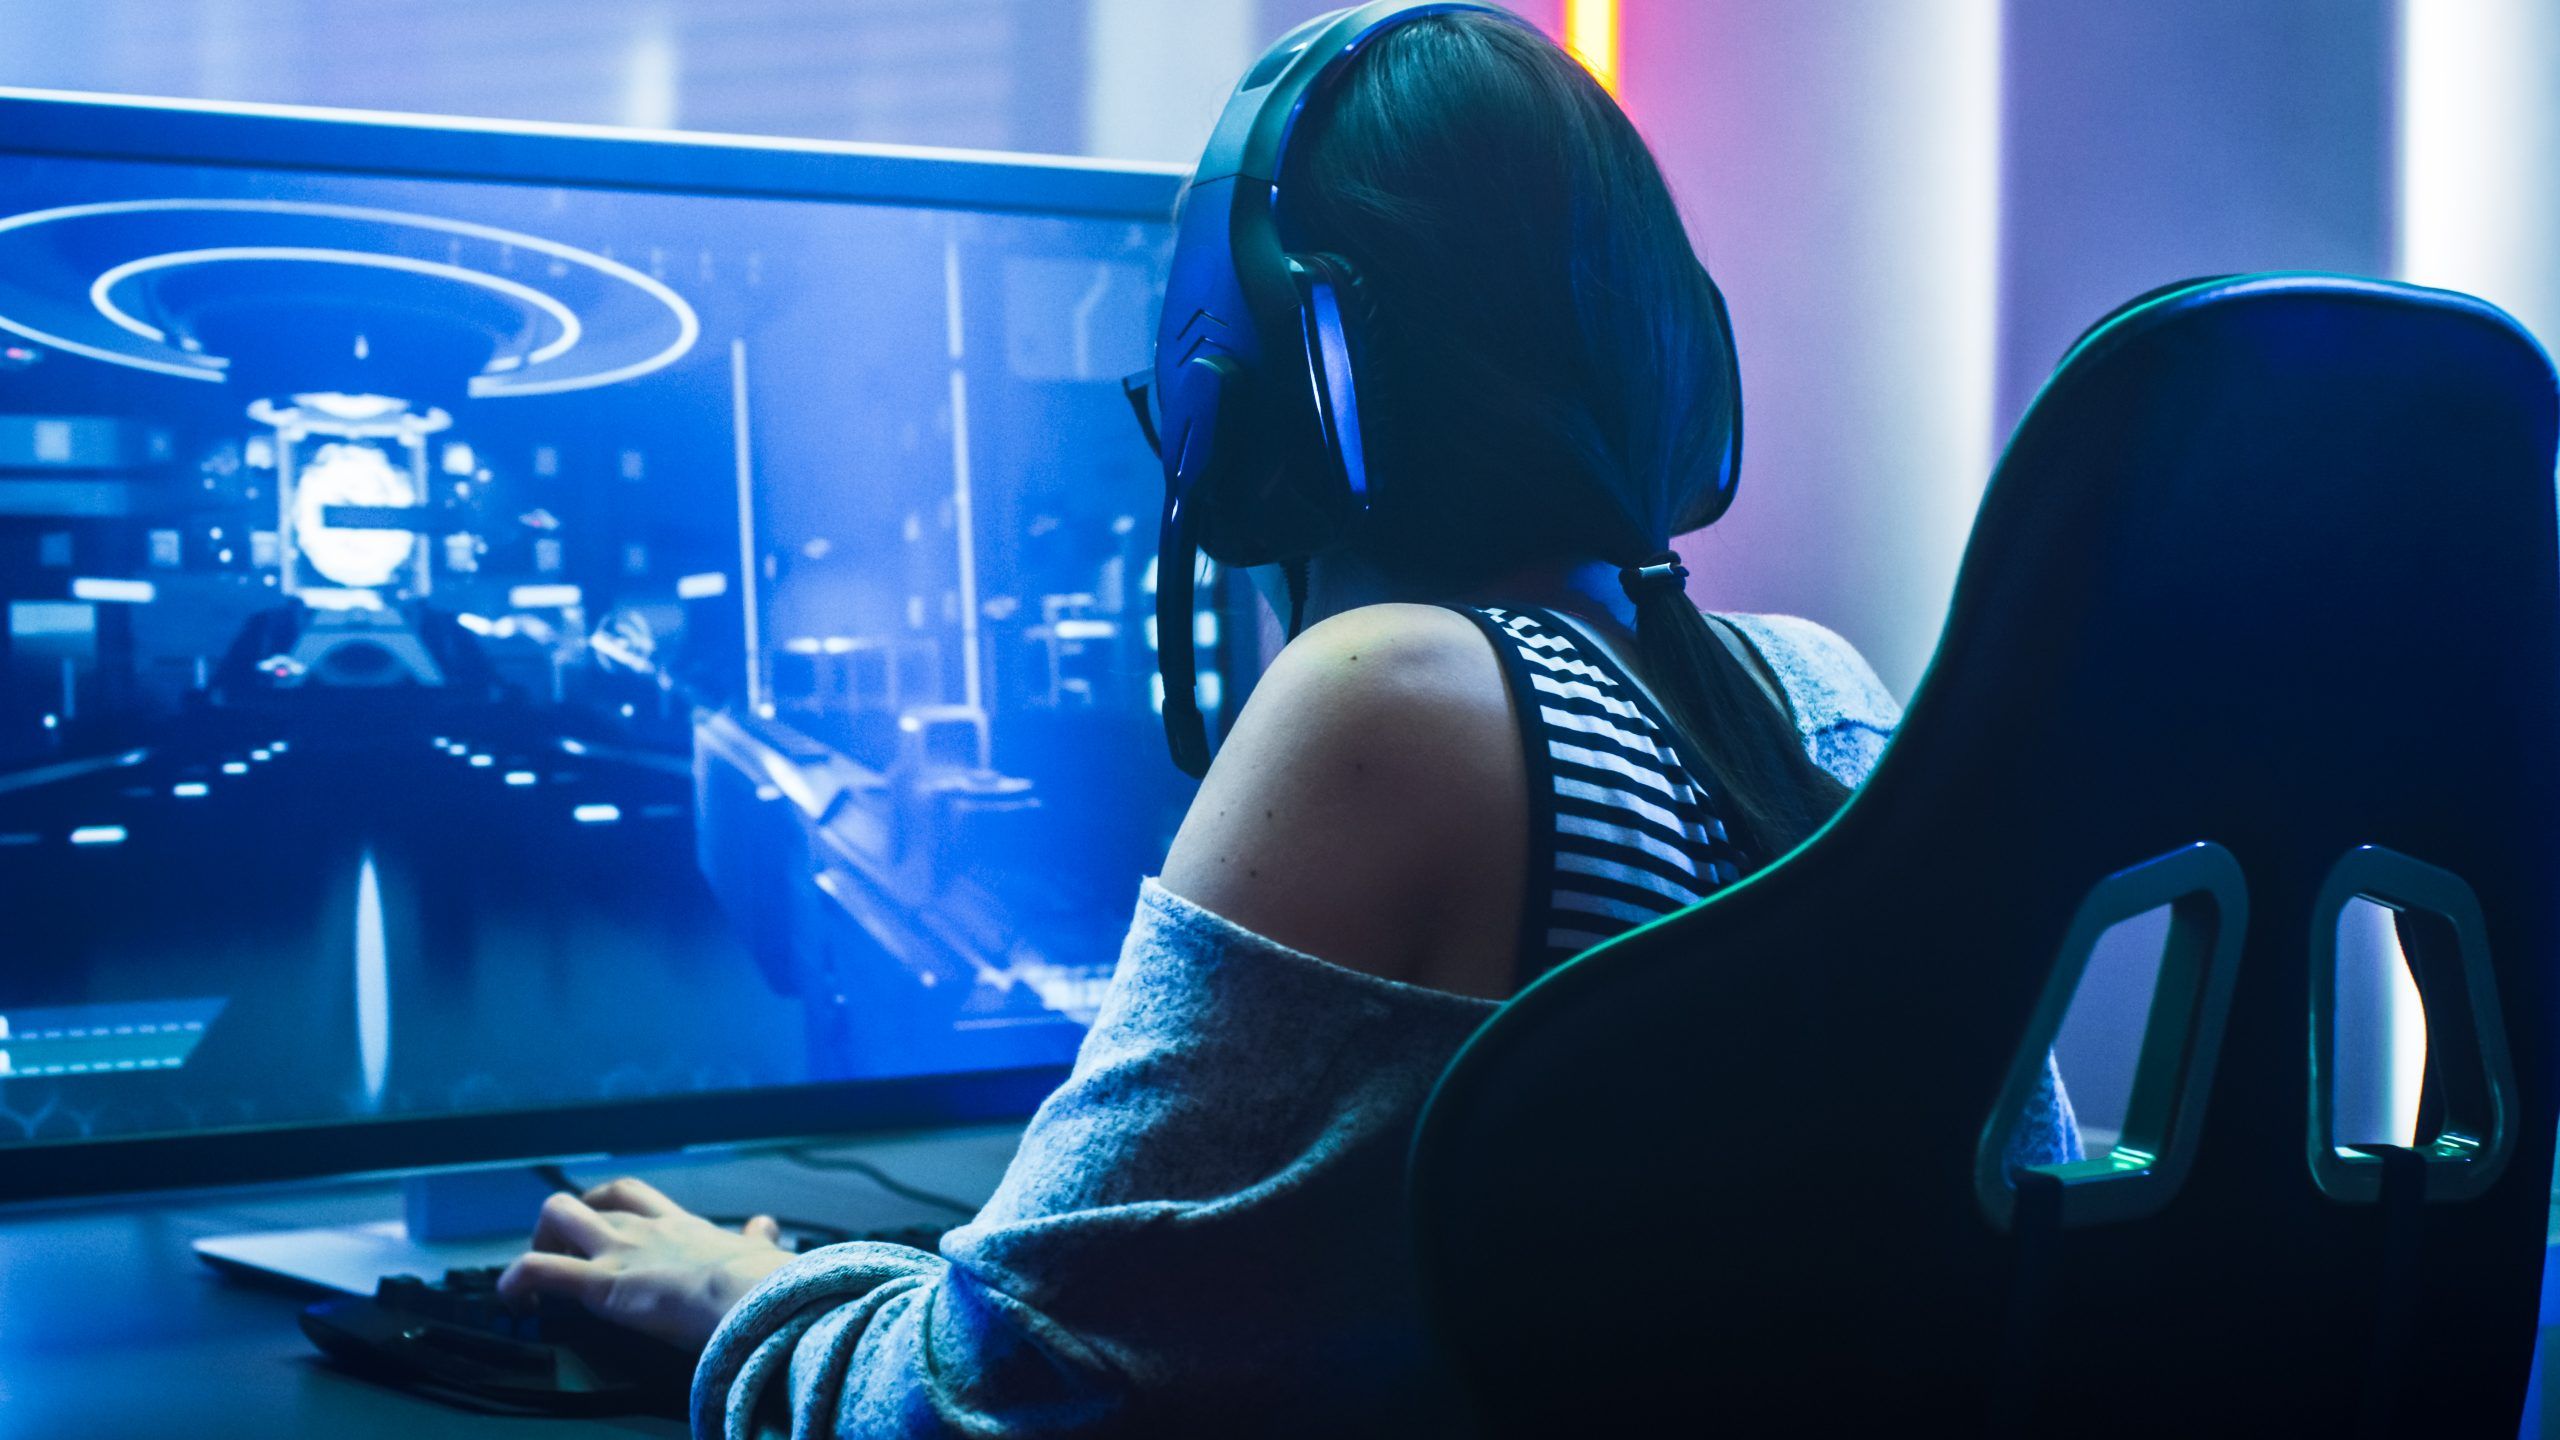 Read more about the article WHY E-SPORTS IS ON THE RISE AND HOW YOU CAN GET INVOLVED